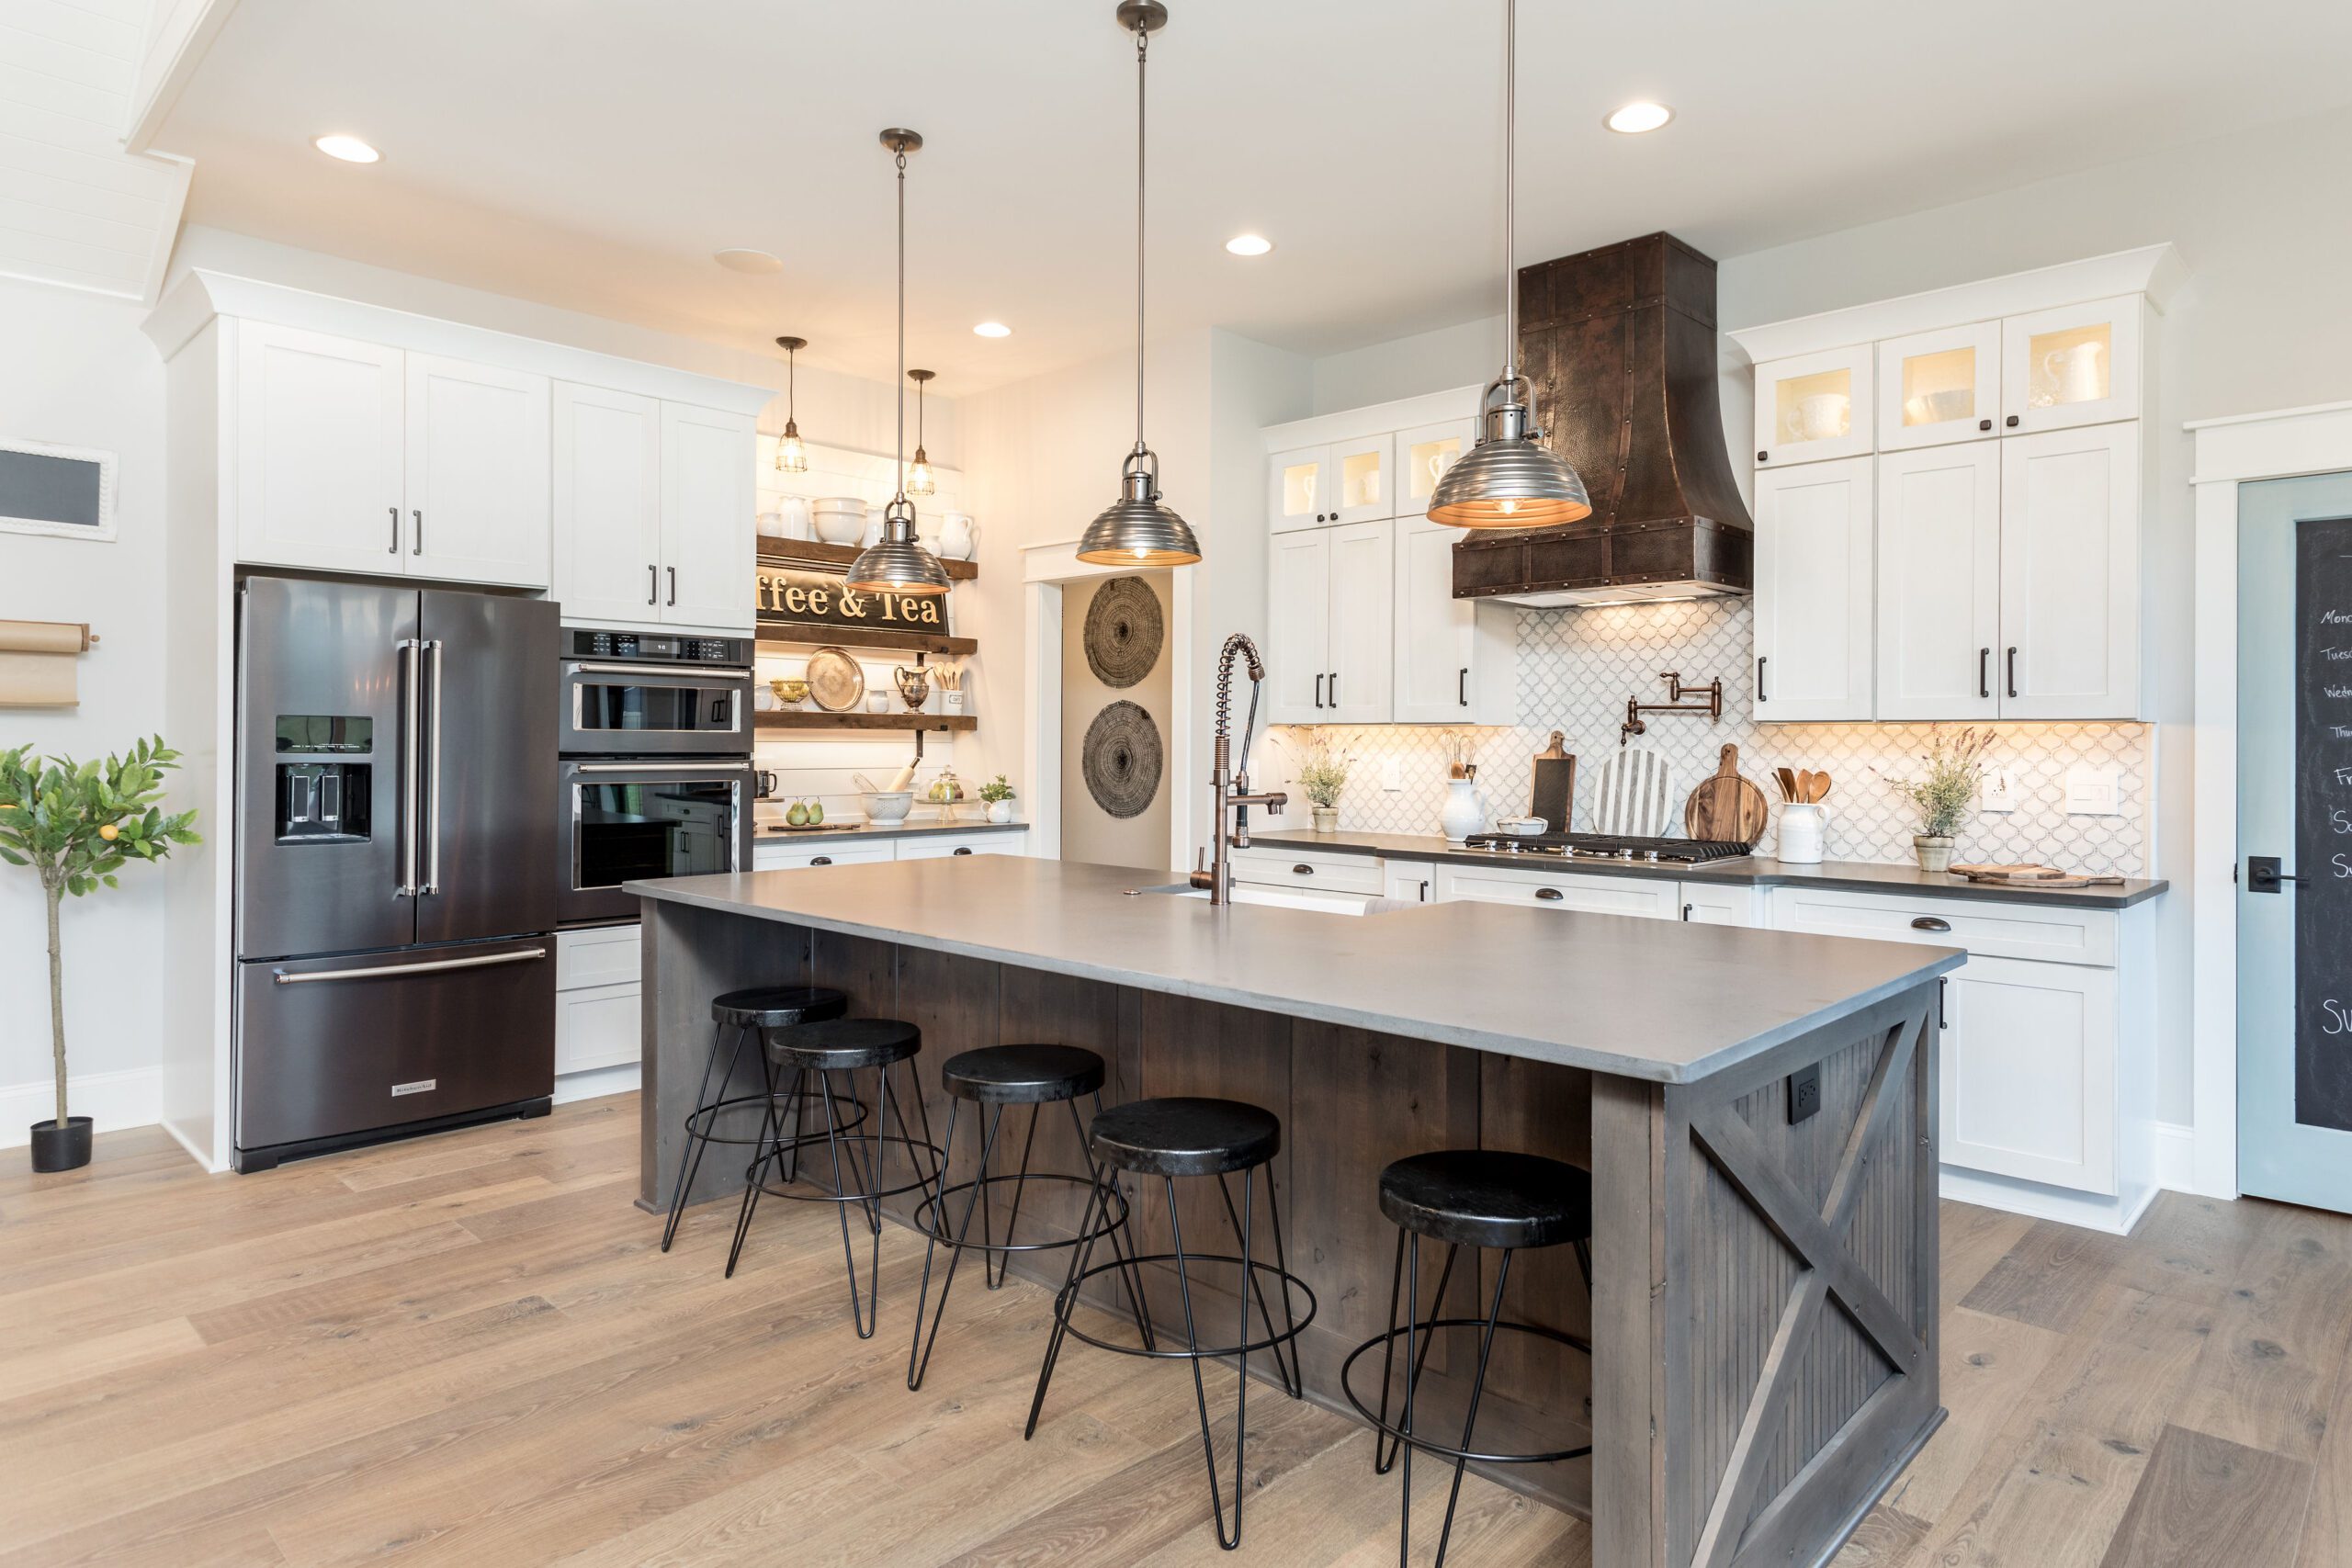 Design Inspiration from Showplace Cabinetry